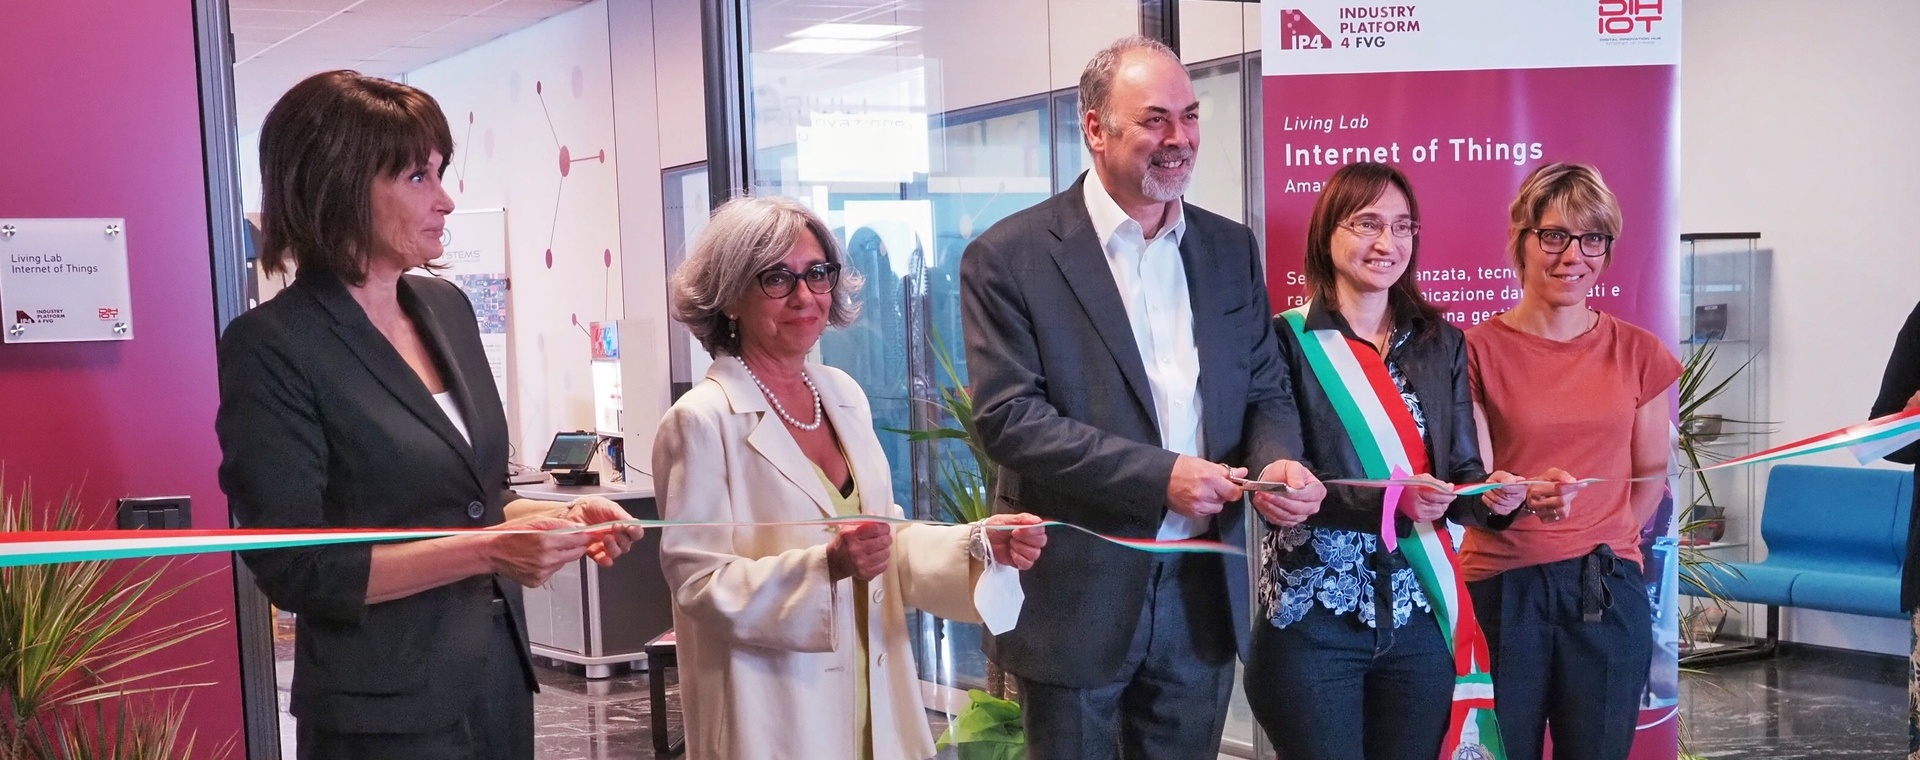 IP4FVG’s new IoT living lab opens in Carnia